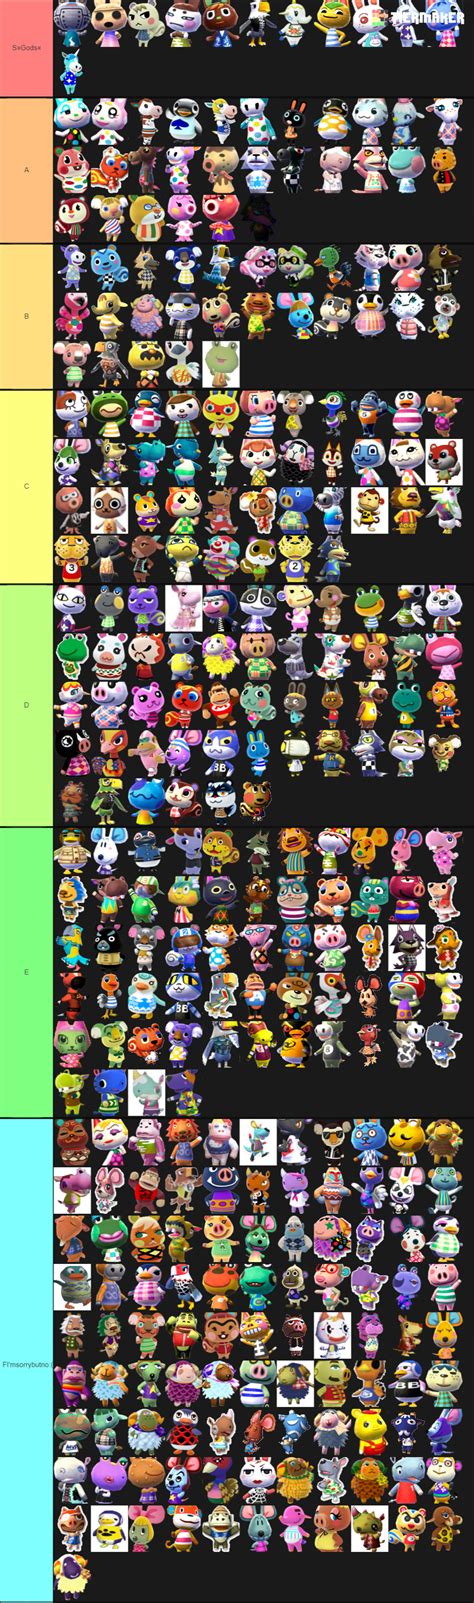 The Animal Crossing New Horizons: All Villagers (413) 2.0 Update T